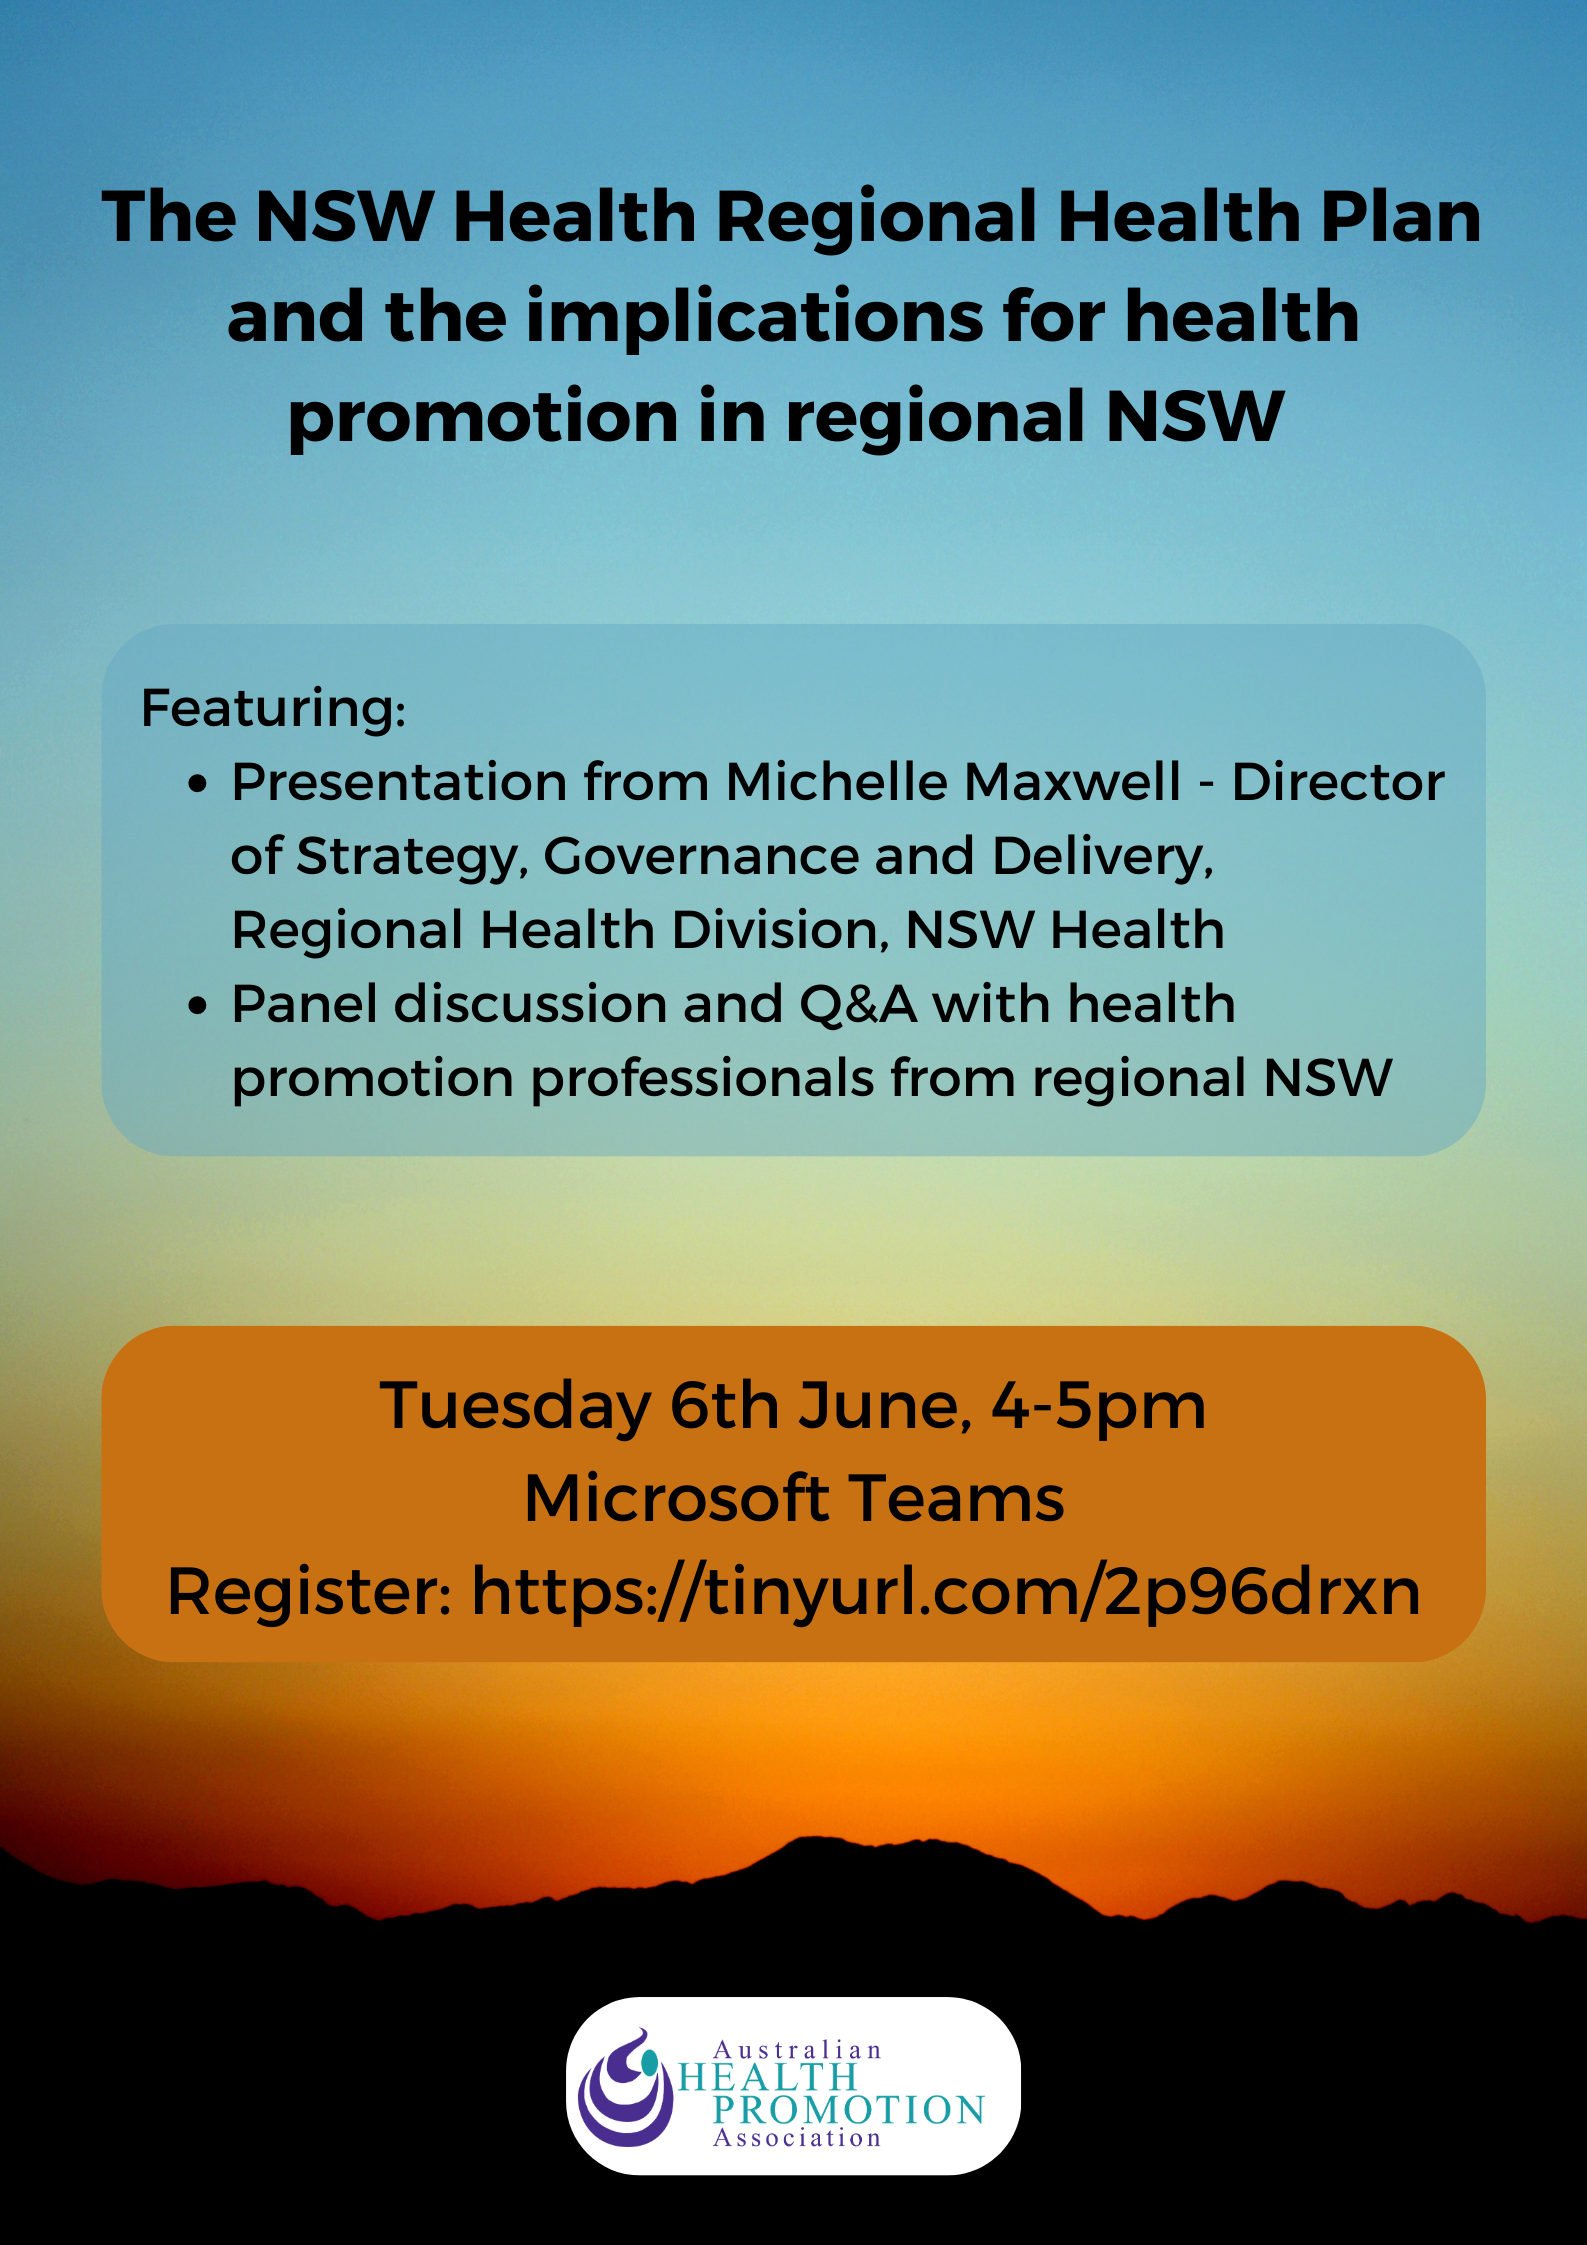 The_NSW_Health_Regional_Health_Plan_and_the_implications_for_health_promotion_in_regional_NSW_v2.png